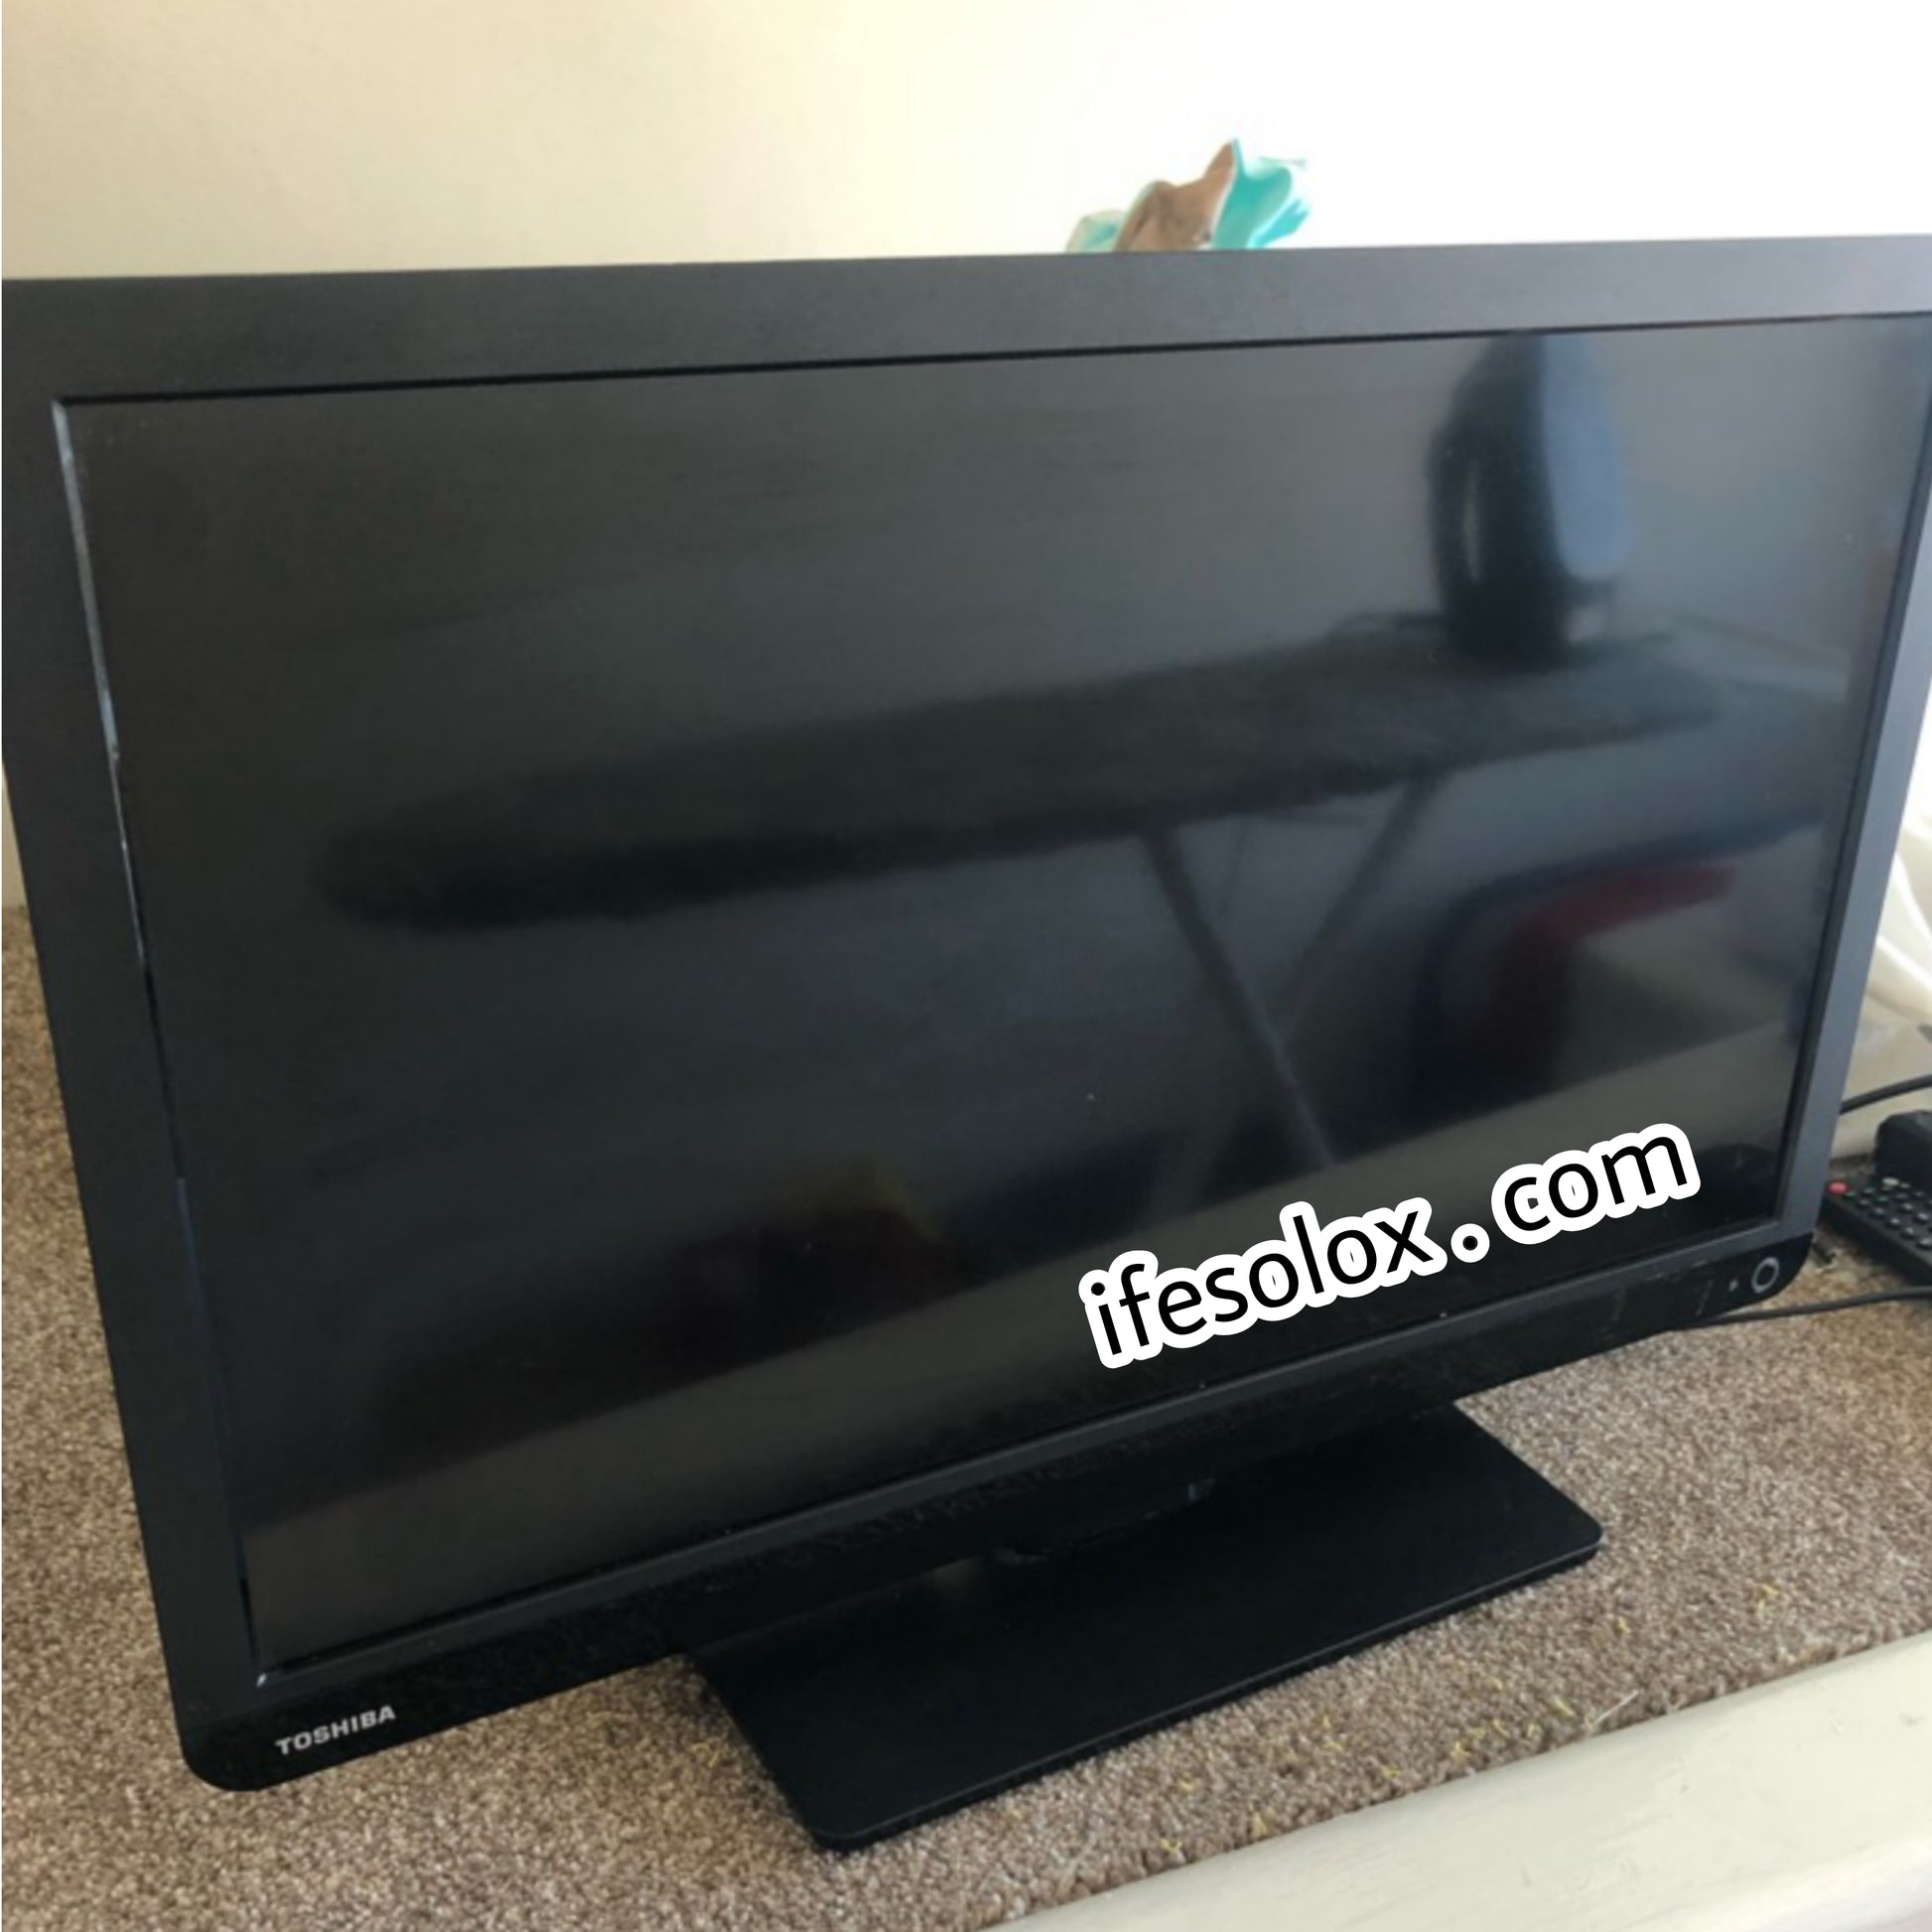 TOSHIBA 24 Inch Full HD LED TV - Foreign Used – IFESOLOX